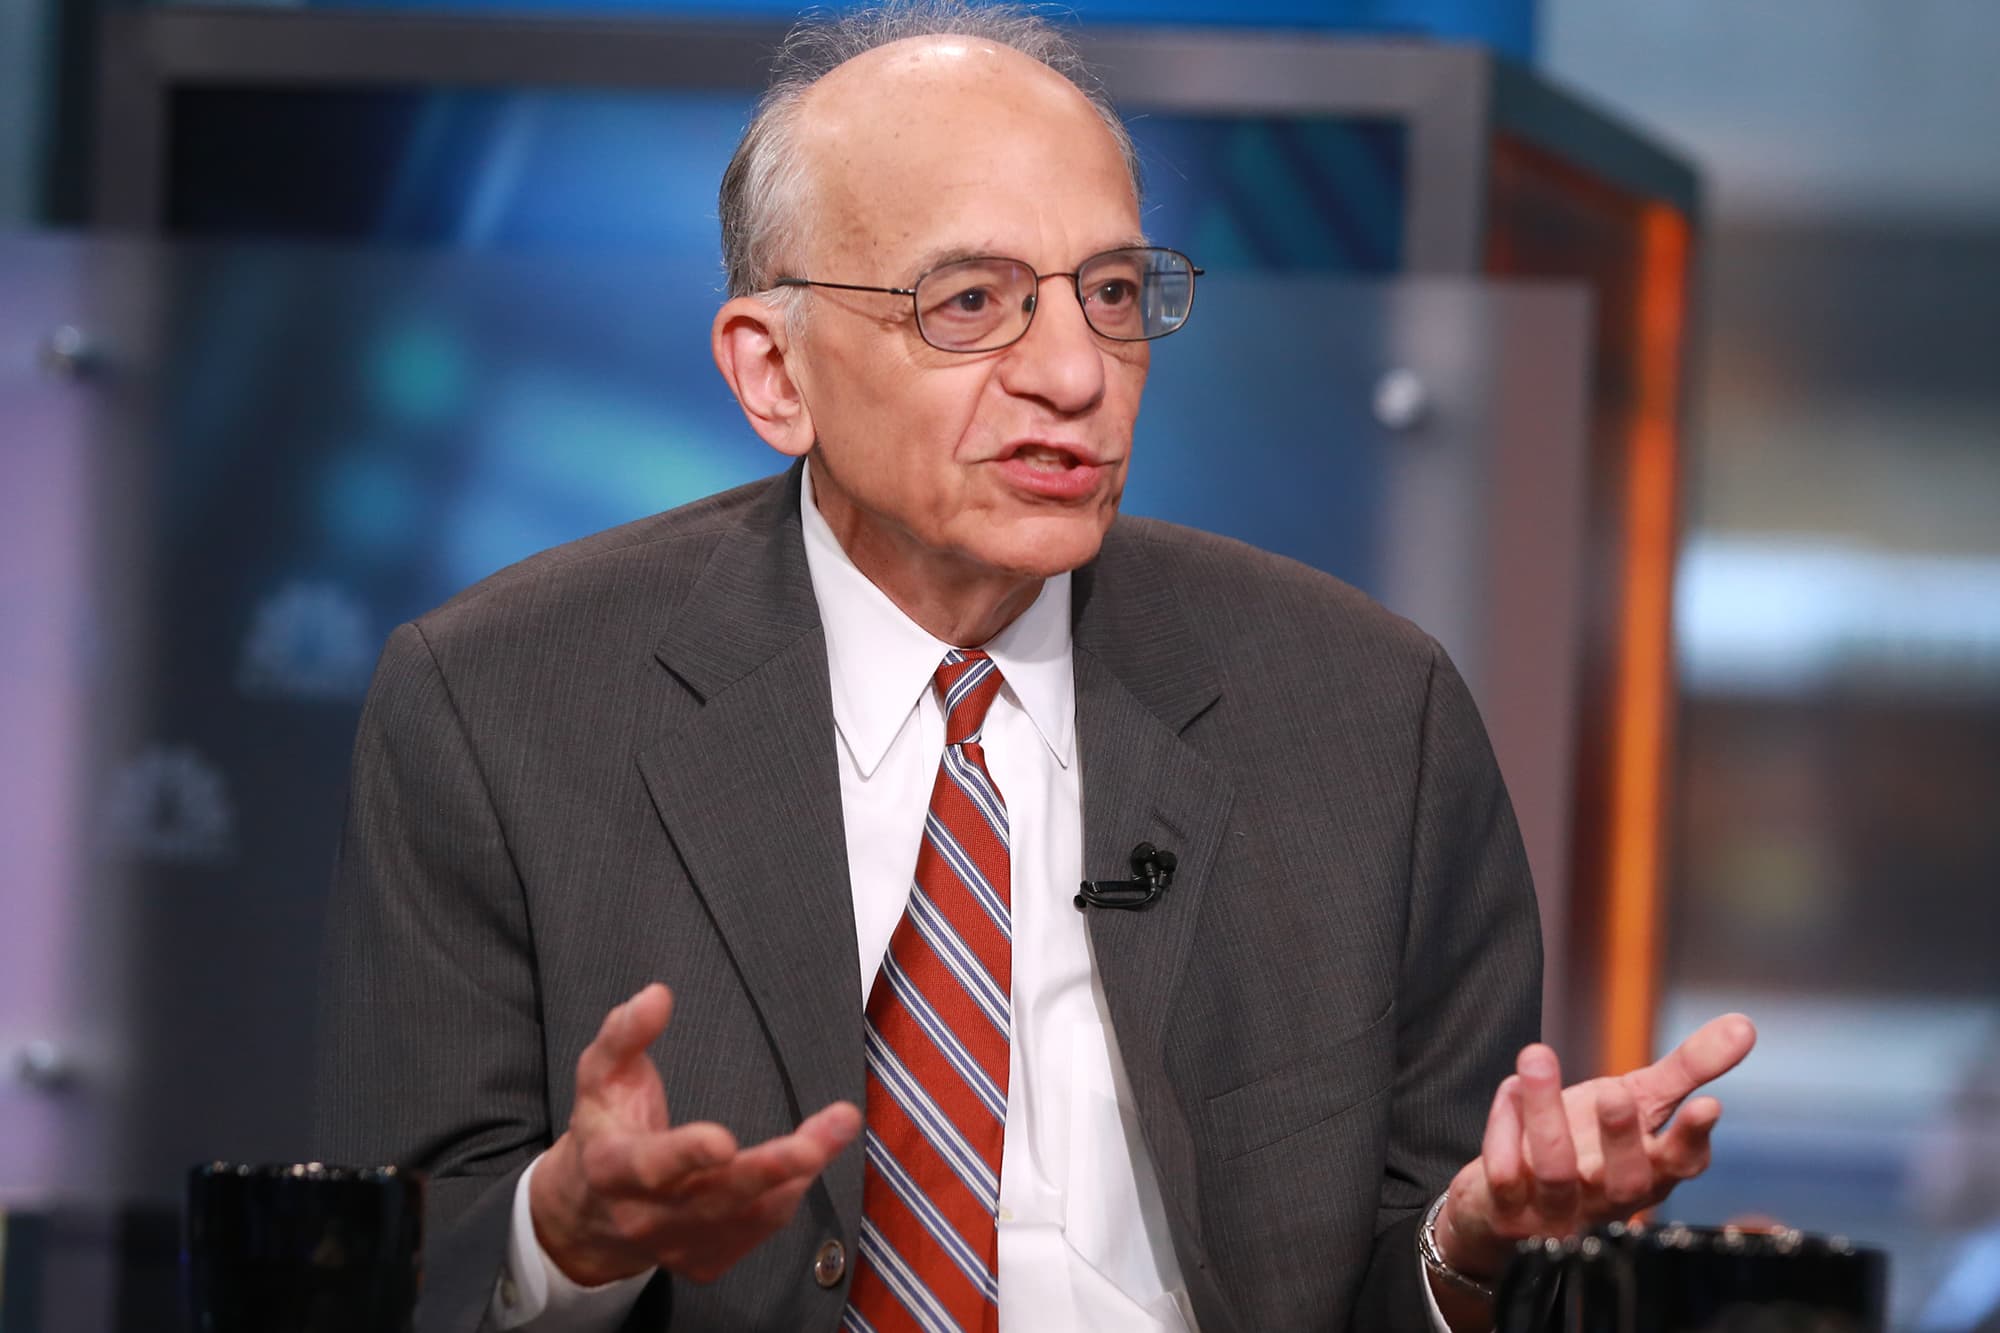 Stocks could rally as much as 20% in 2023, predicts Wharton's Jeremy Siegel